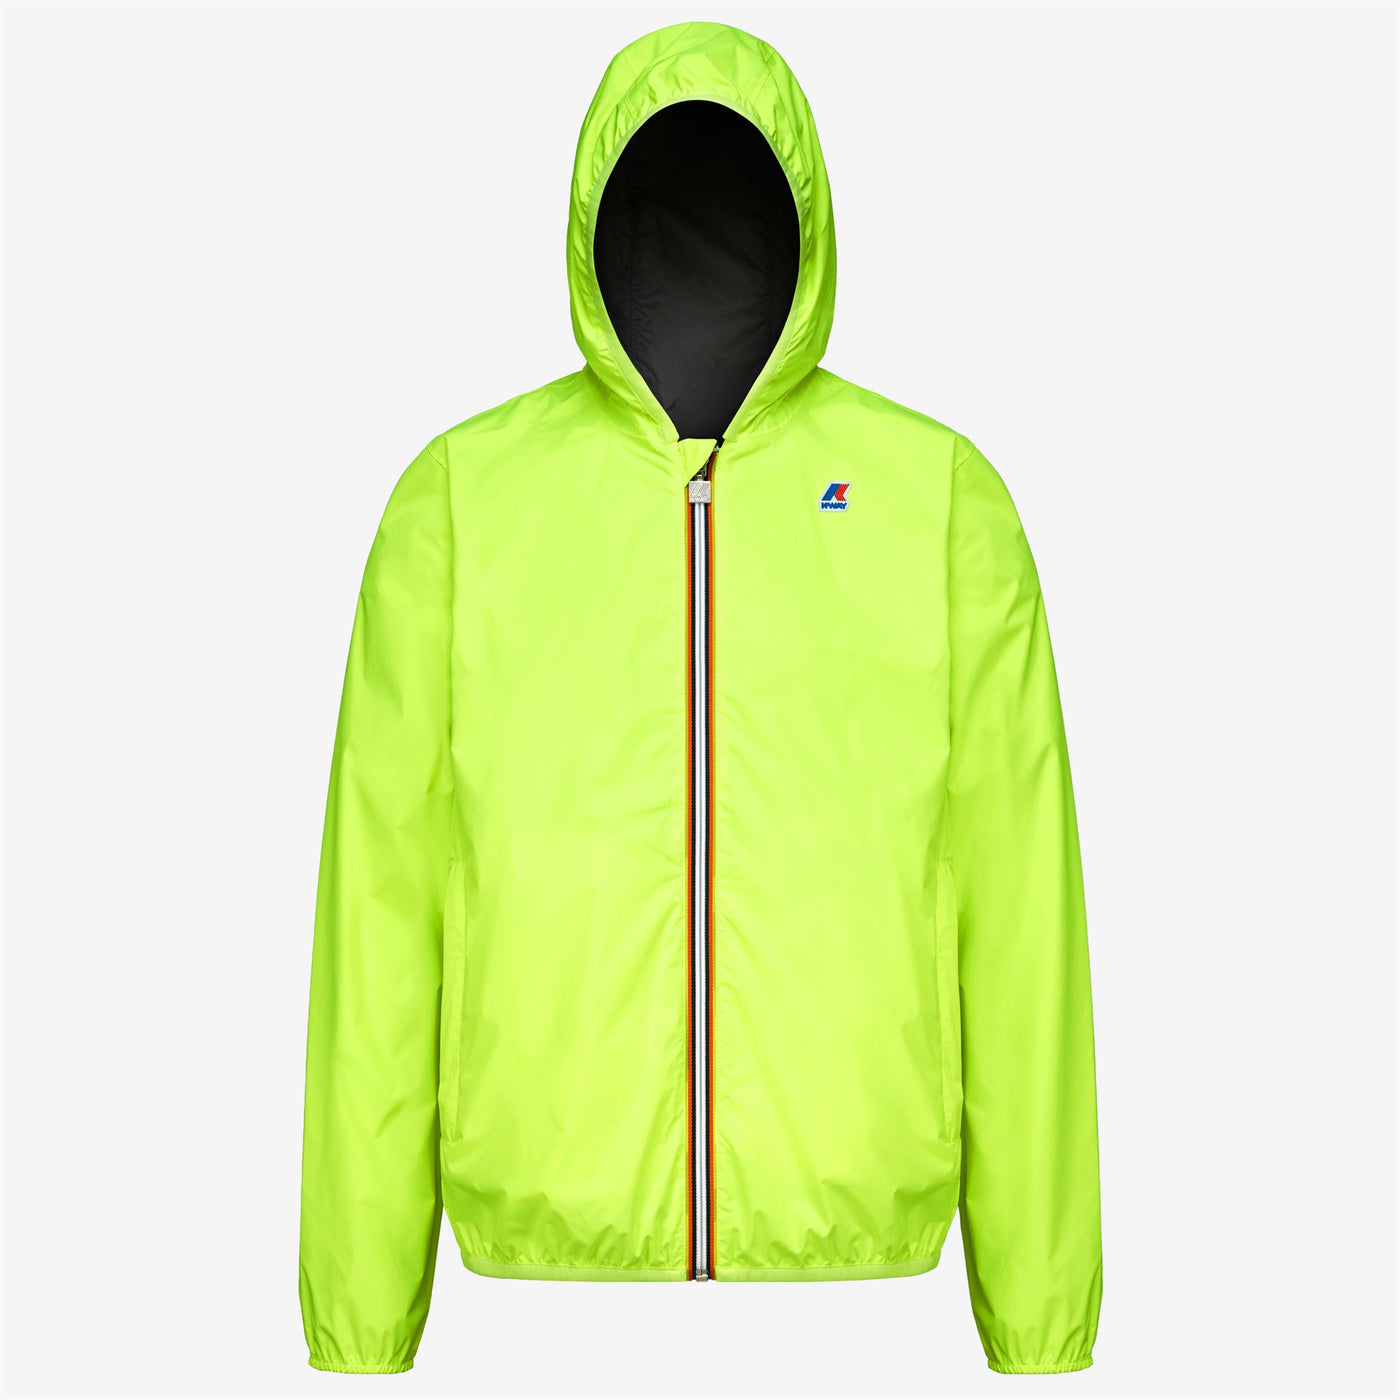 Jackets Man Jacques Plus Double Fluo Short YELLOW FLUO-GREY Photo (jpg Rgb)			